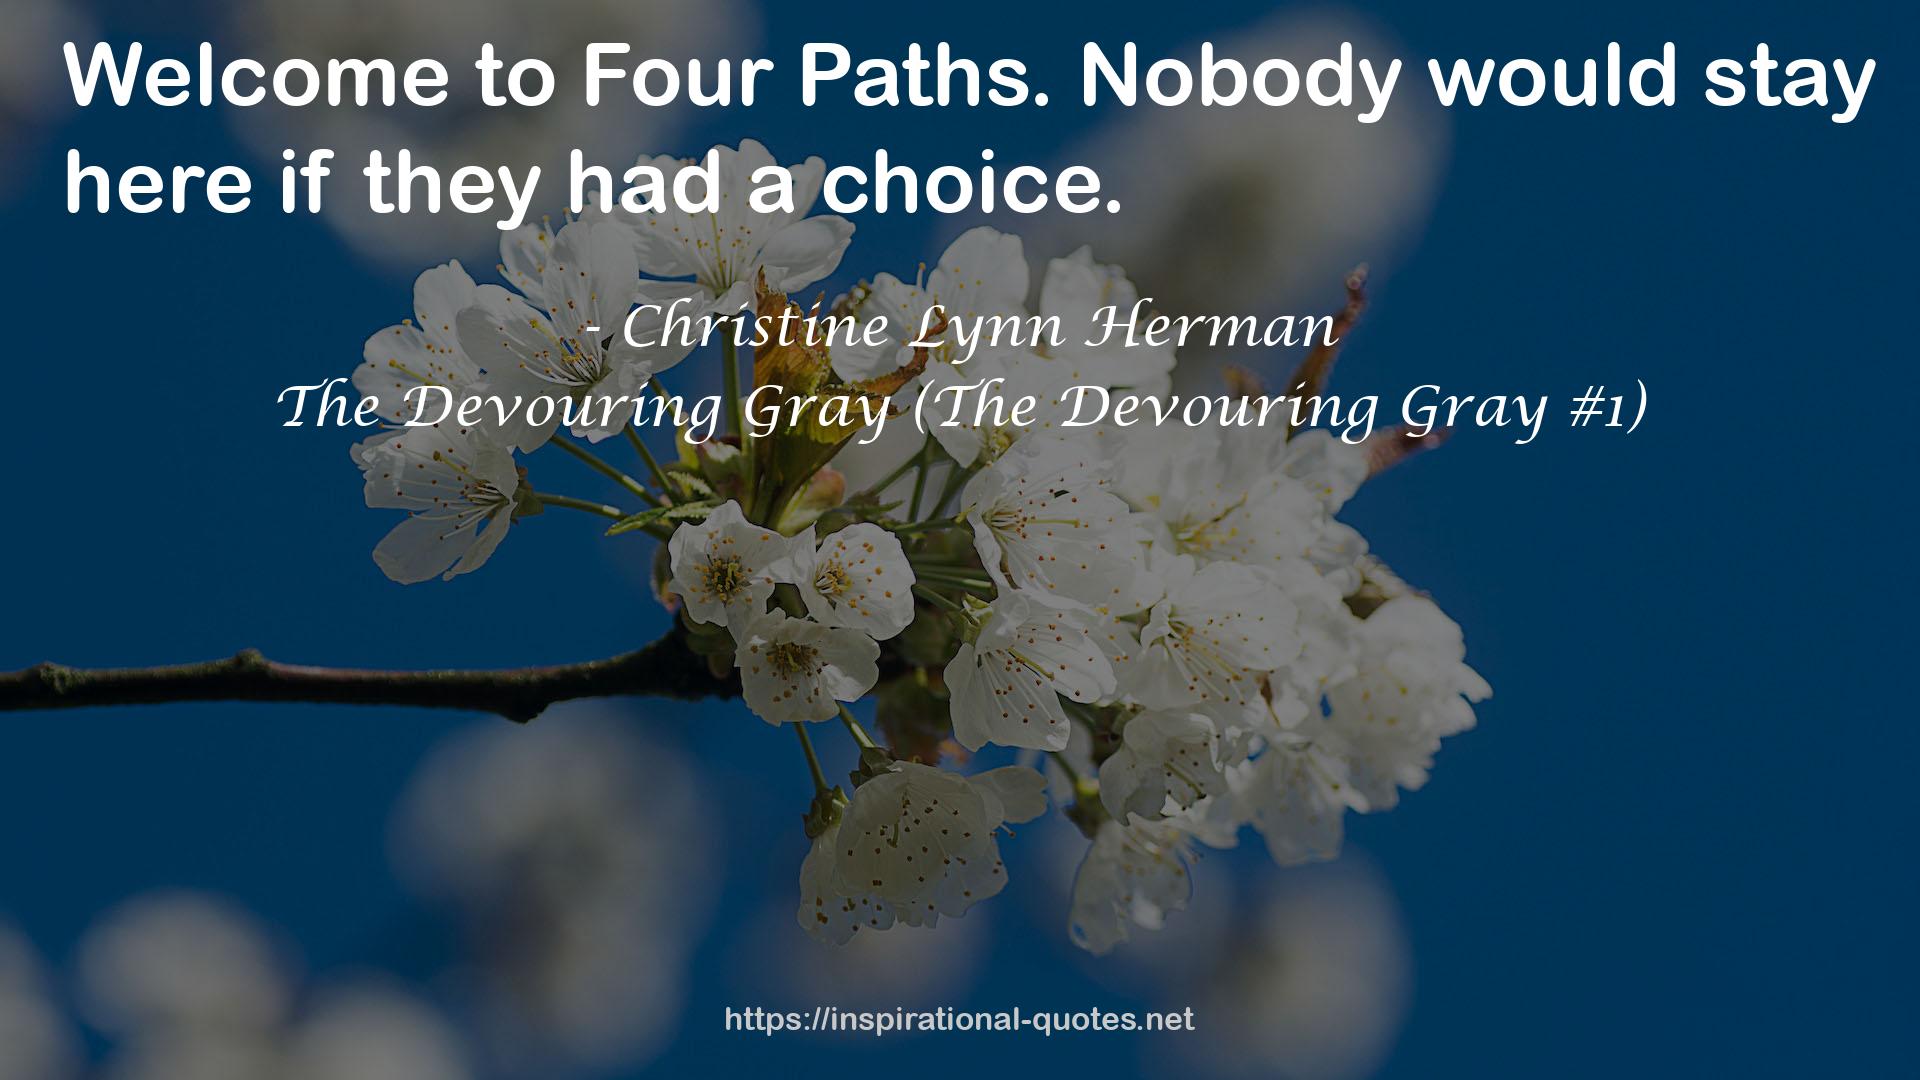 The Devouring Gray (The Devouring Gray #1) QUOTES